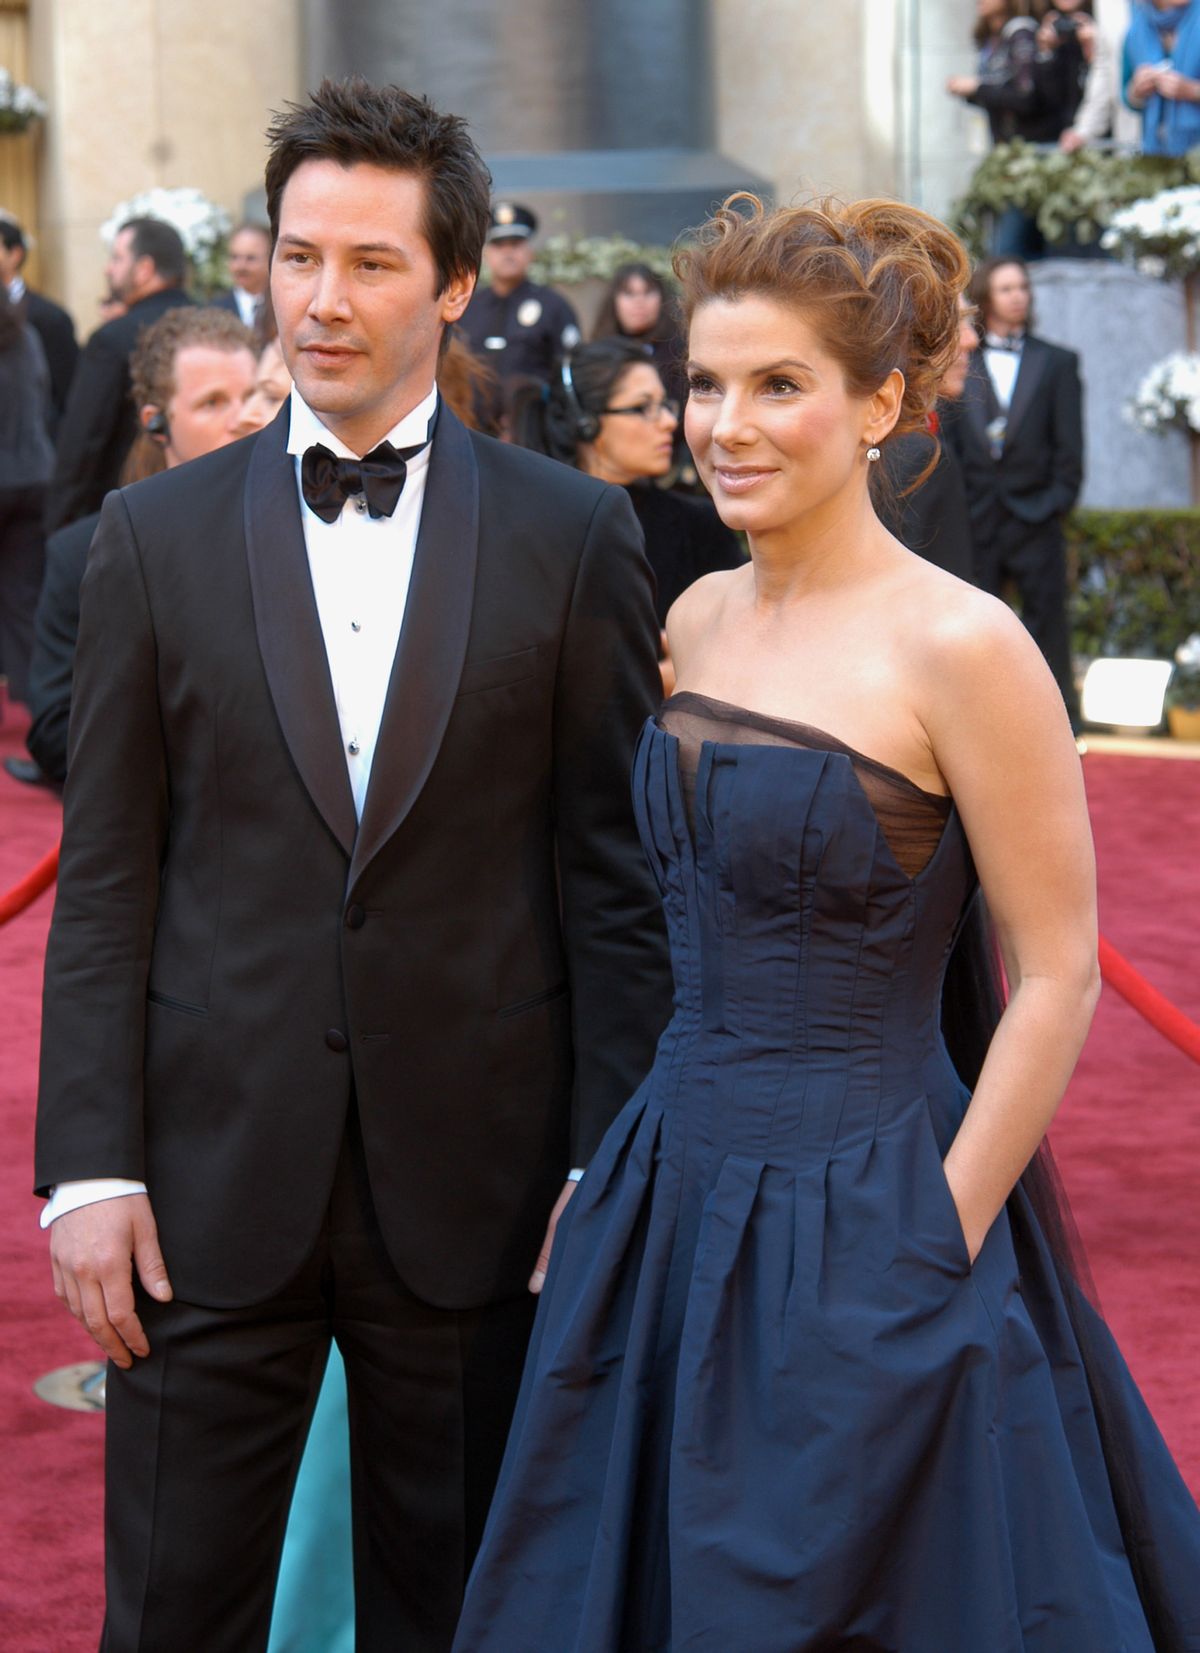 Keanu Reeves and Sandra Bullock during The 78th Annual Academy Awards - Arrivals at Kodak Theatre in Hollywood, California, United States. (Photo by Ron Galella, Ltd./Ron Galella Collection via Getty Images) (Ron Galella, Ltd./Ron Galella Collection via Getty Images)